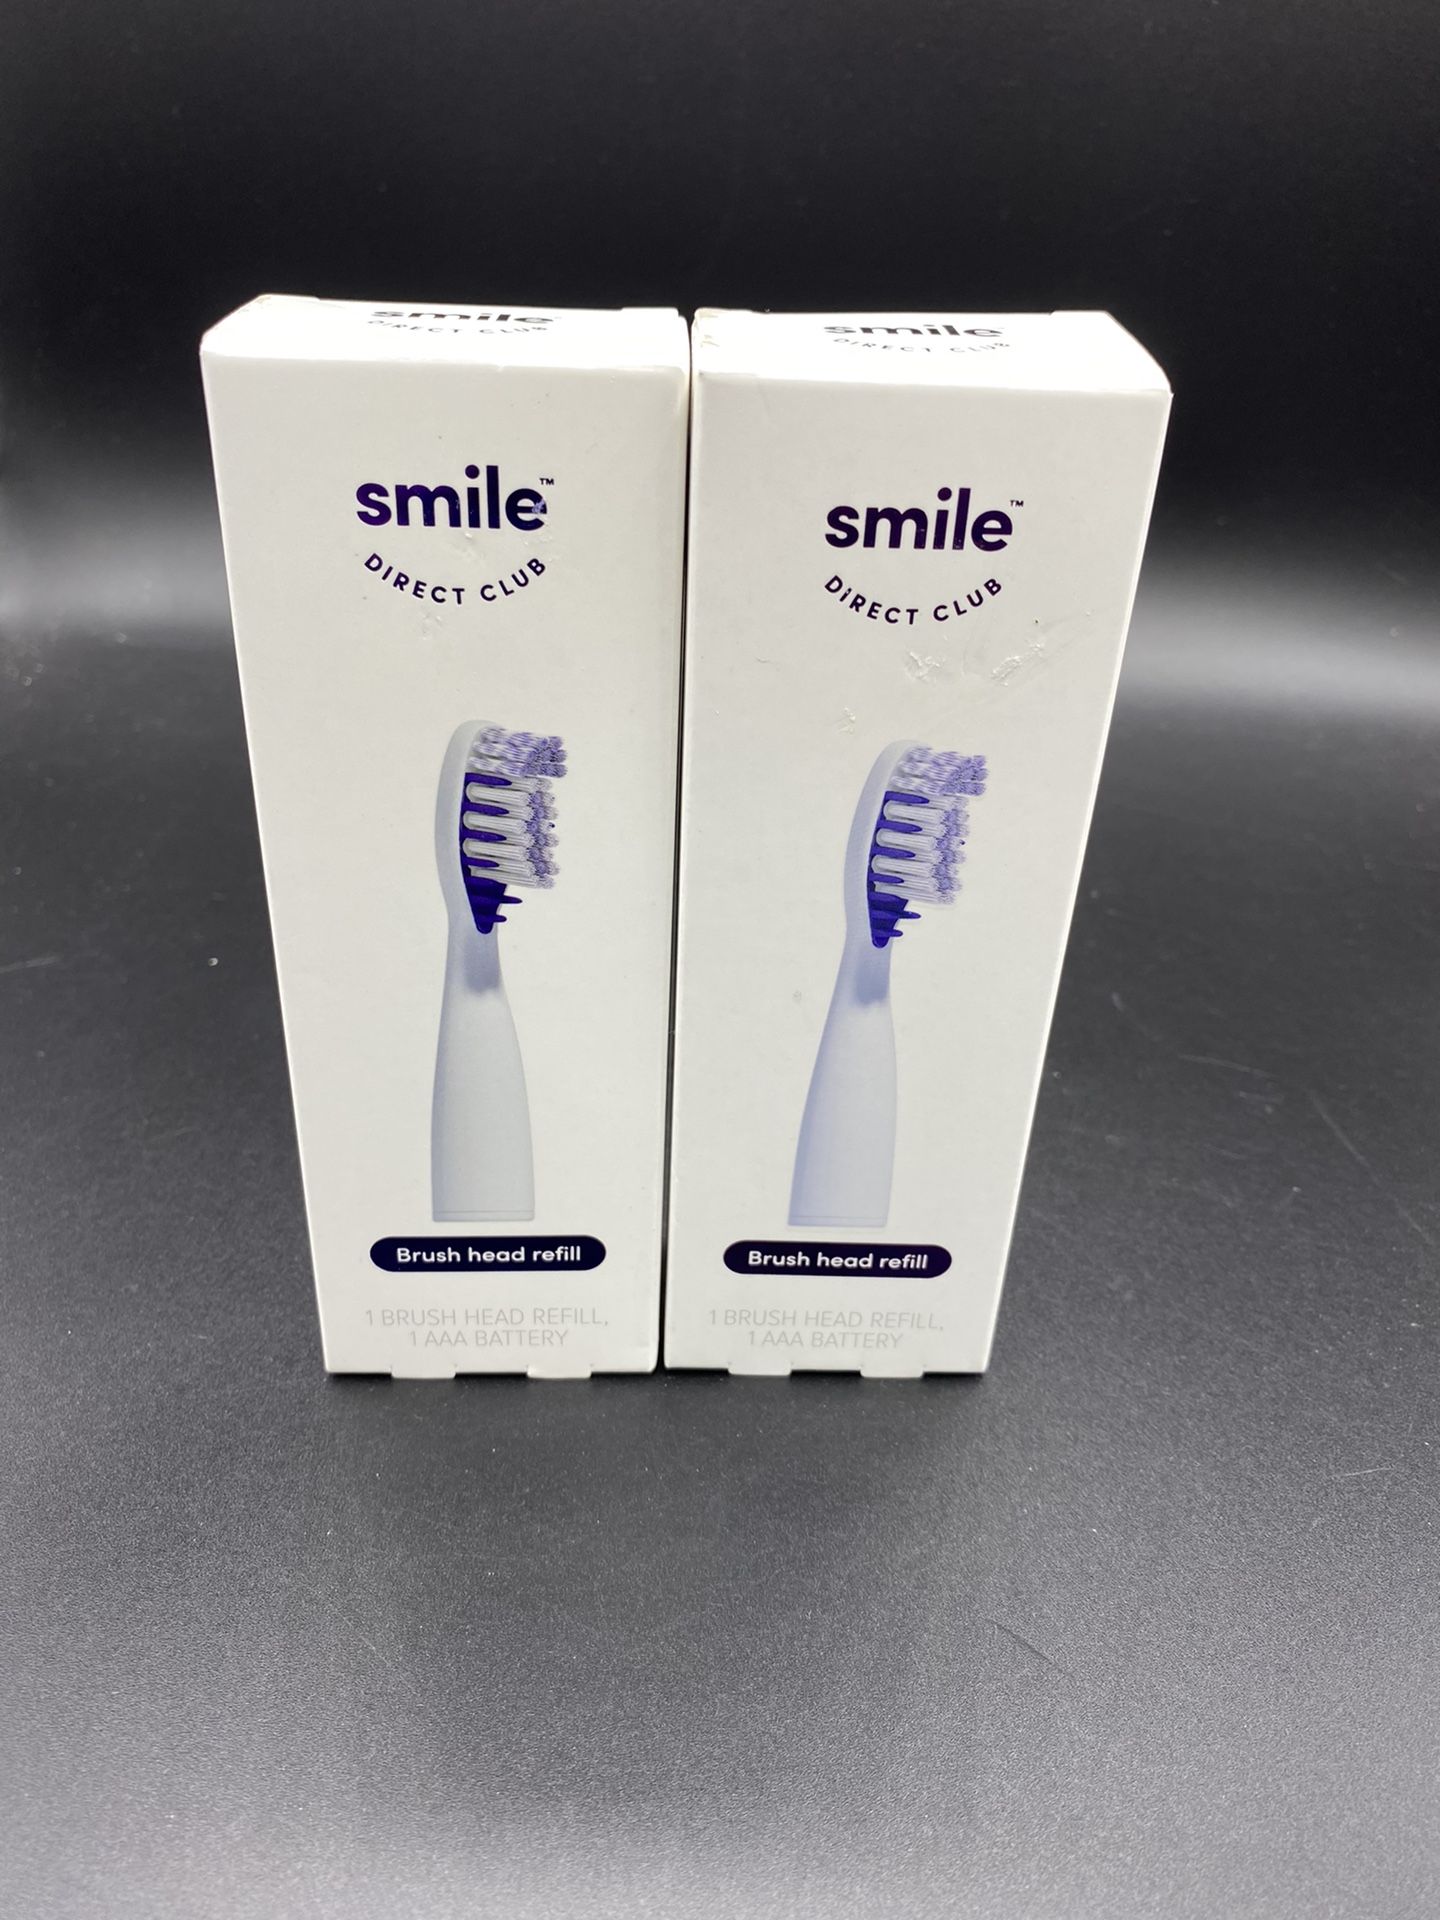 Smile Direct Club Brush Head Refill 1 Brush Head Refill 1 AAA BATTERY. Lot Of 2